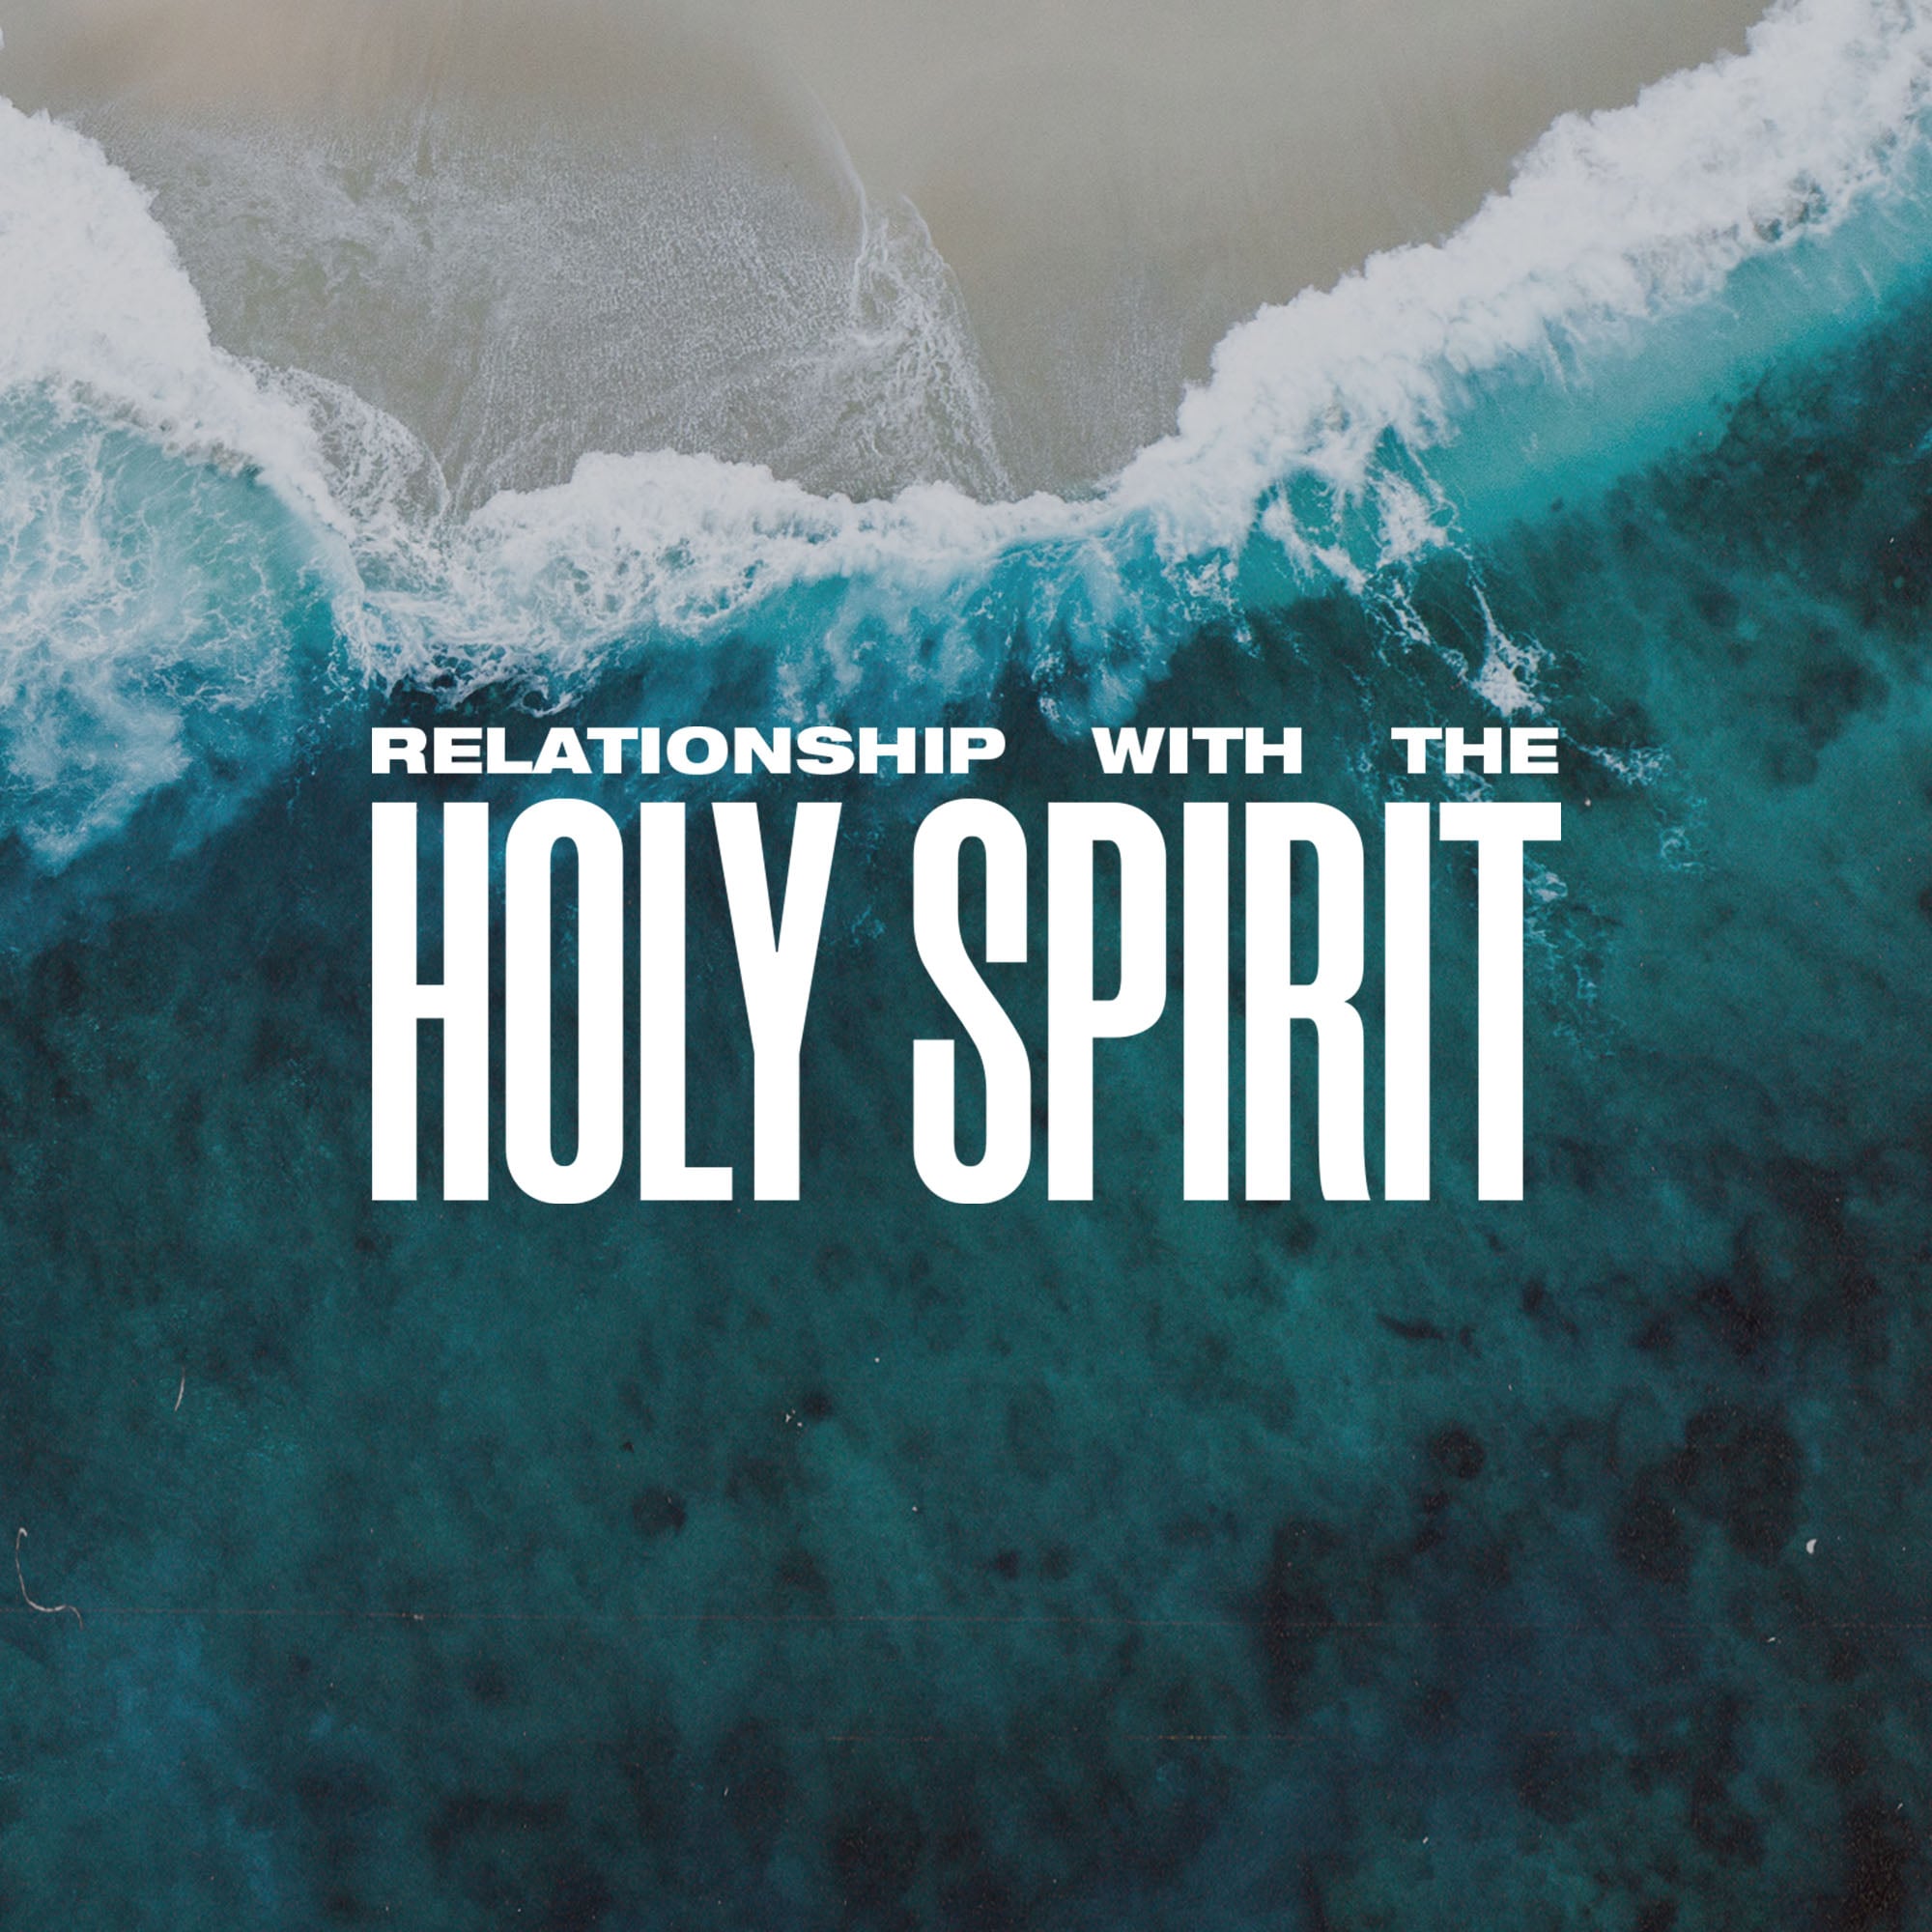 resource - Relationship with the Holy Spirit